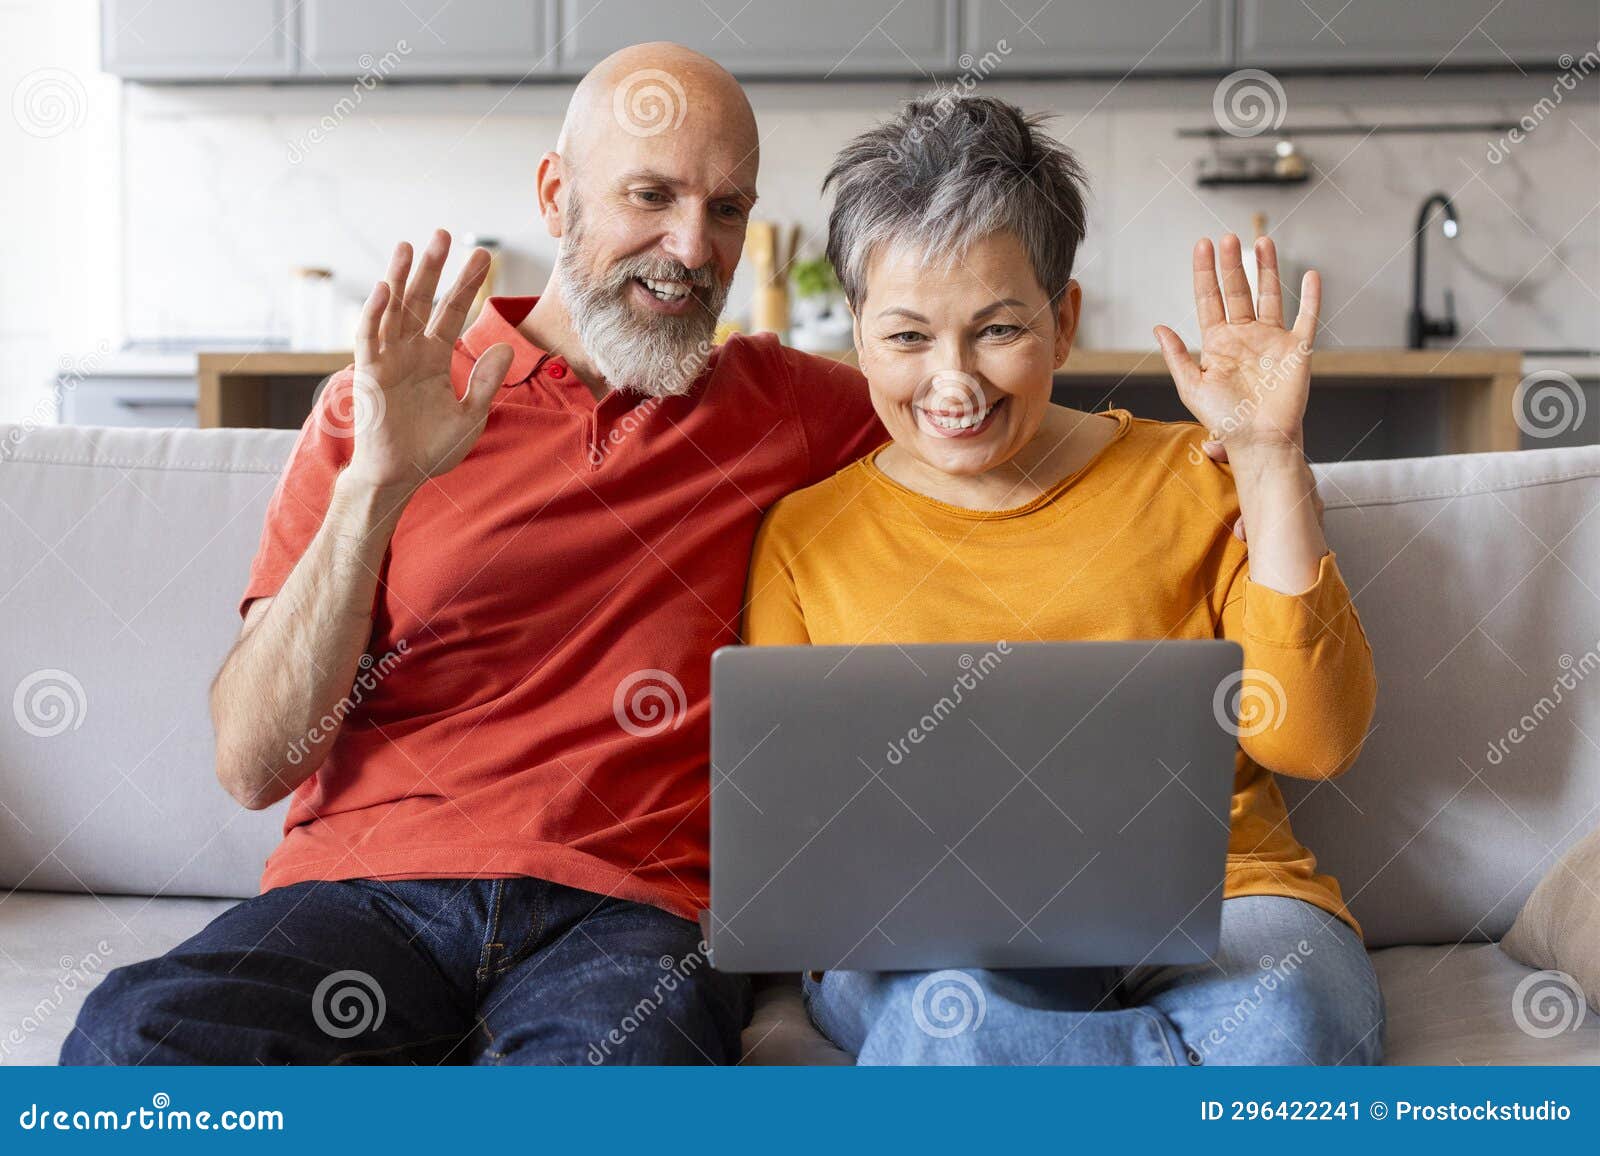 Happy Senior Couple Making Video Call With Laptop At Home Stock Image